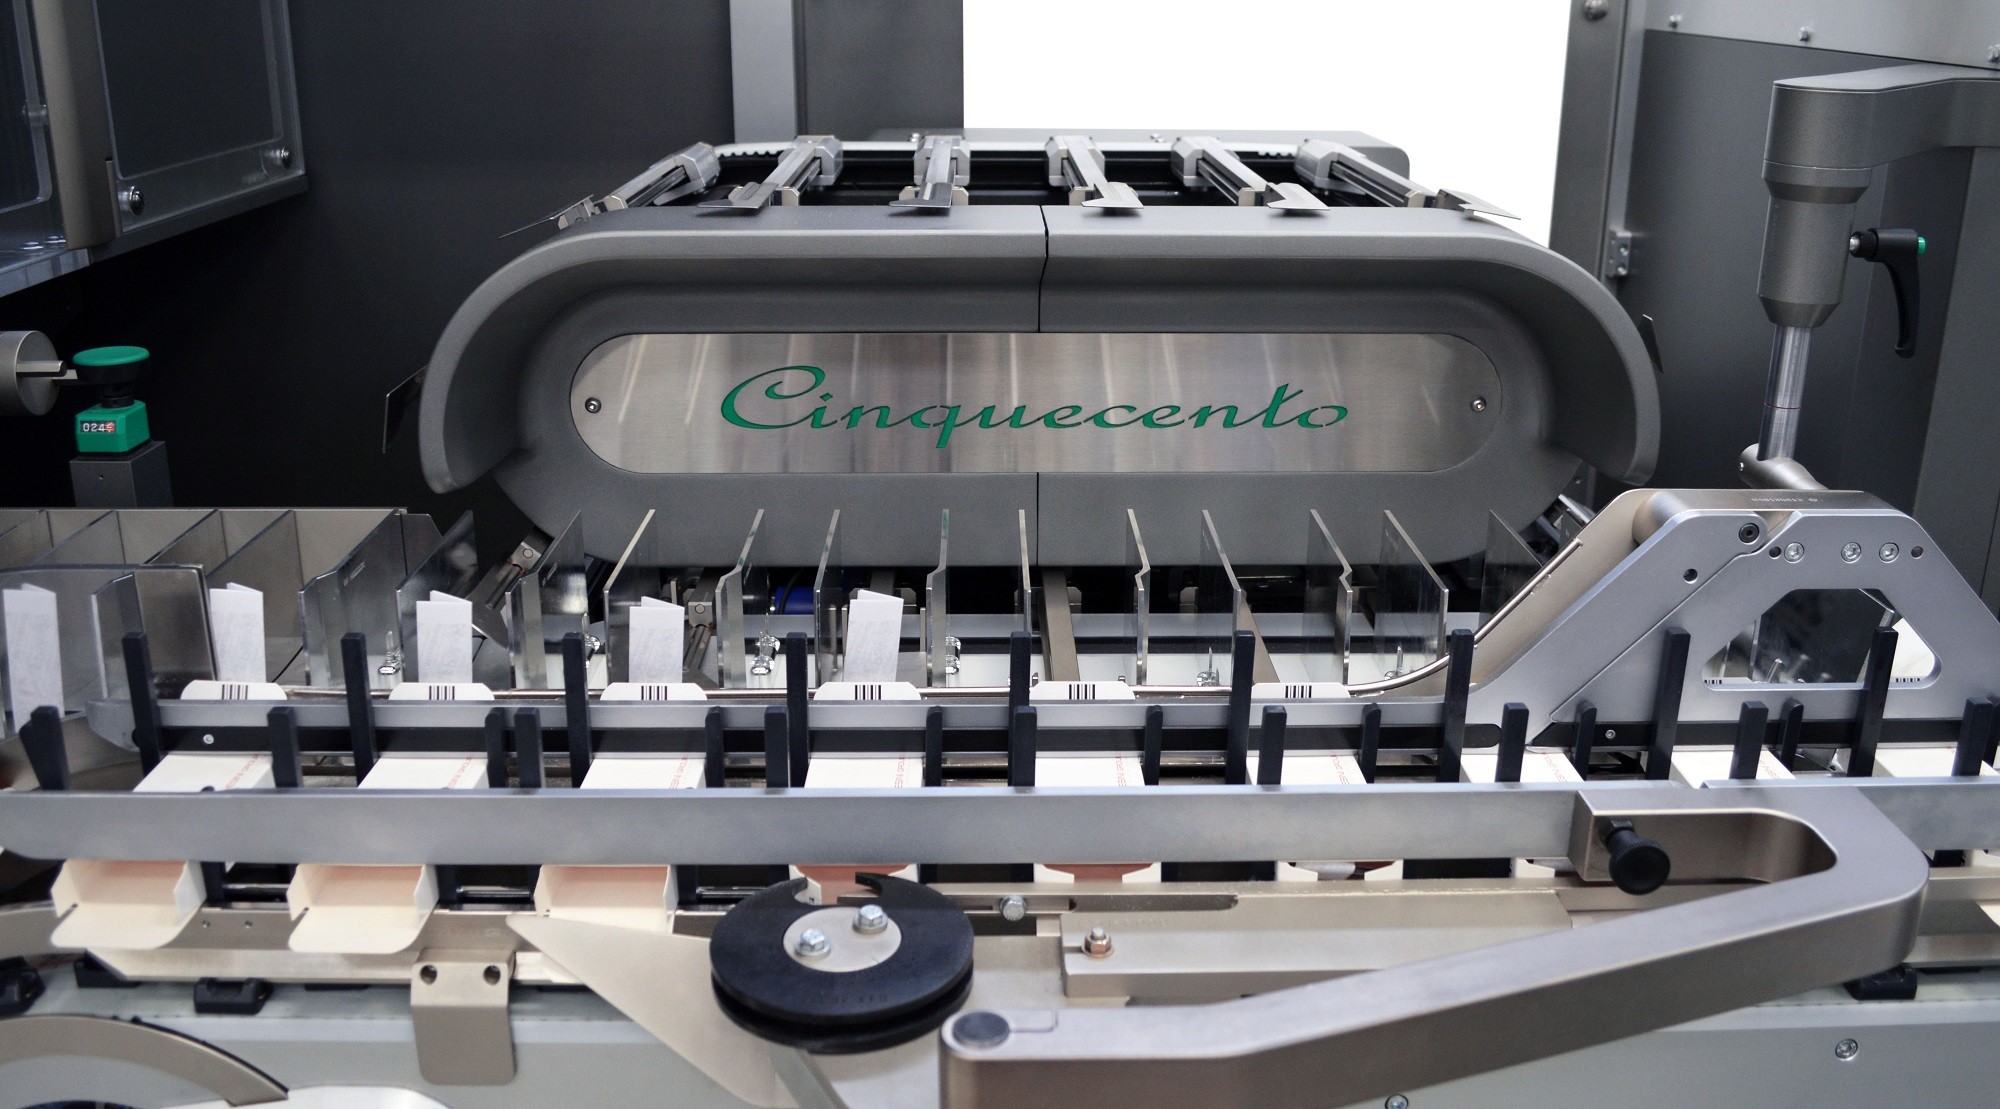 CIPM CHINA 2019: THE MARCHESINI GROUP SHOWCASES THE INTEGRA 520 BLISTER LINE